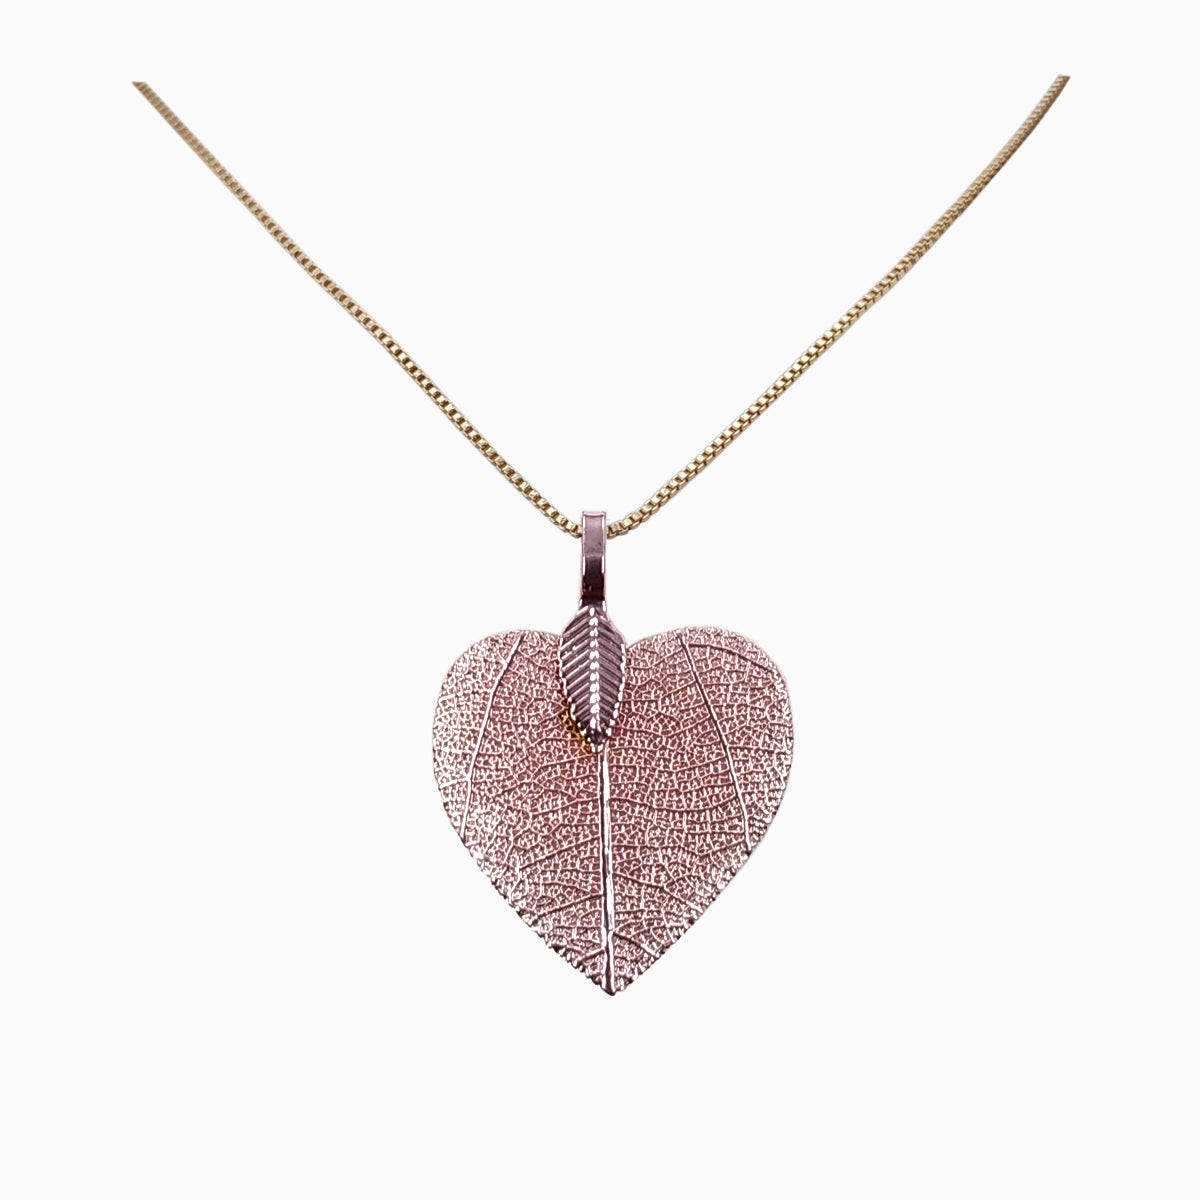 Heart - Real Leaf Pendant Necklace